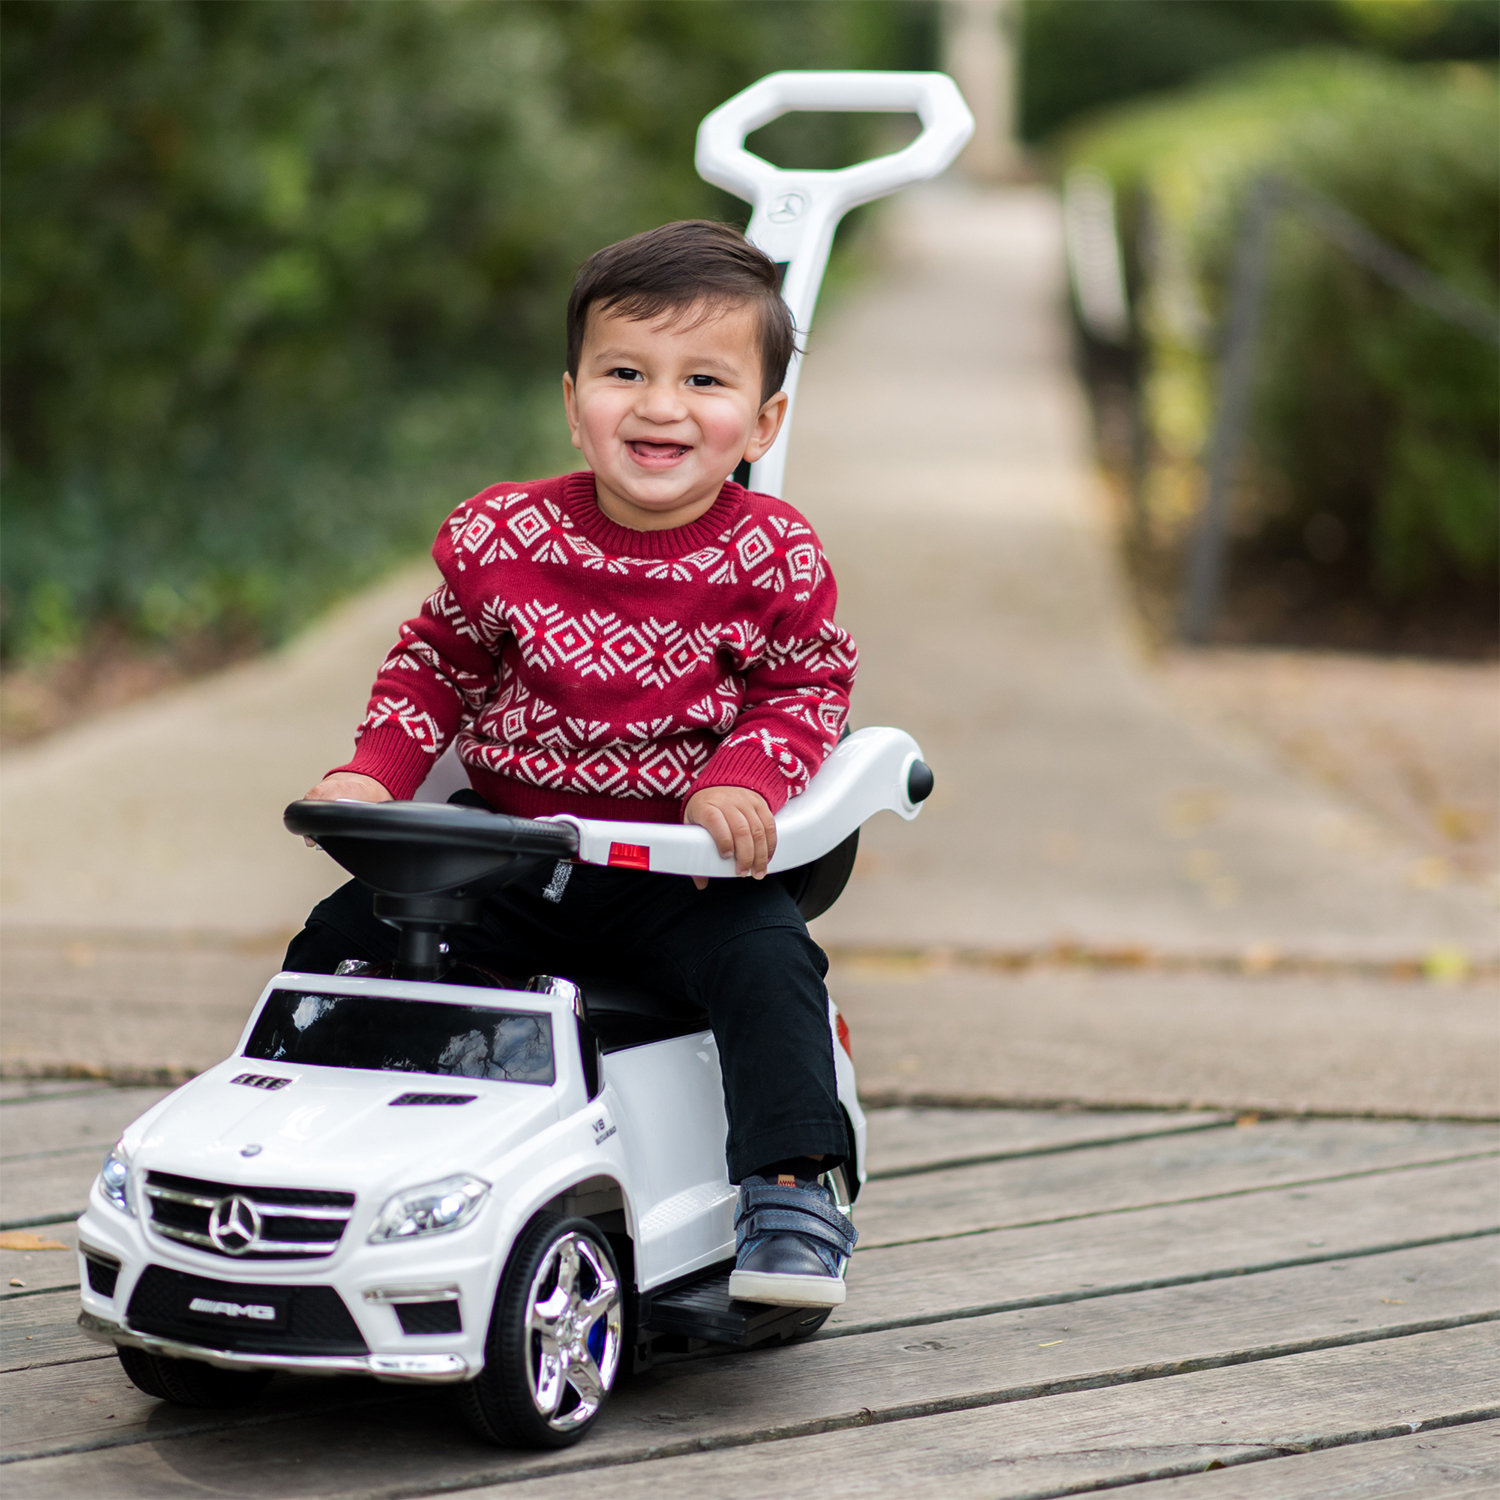 Best Ride On Cars Toddler 4-in-1 Mercedes Push Car Stroller Ride-On Toy with Horn Sounds, LED Lights, and Removable Handle - White